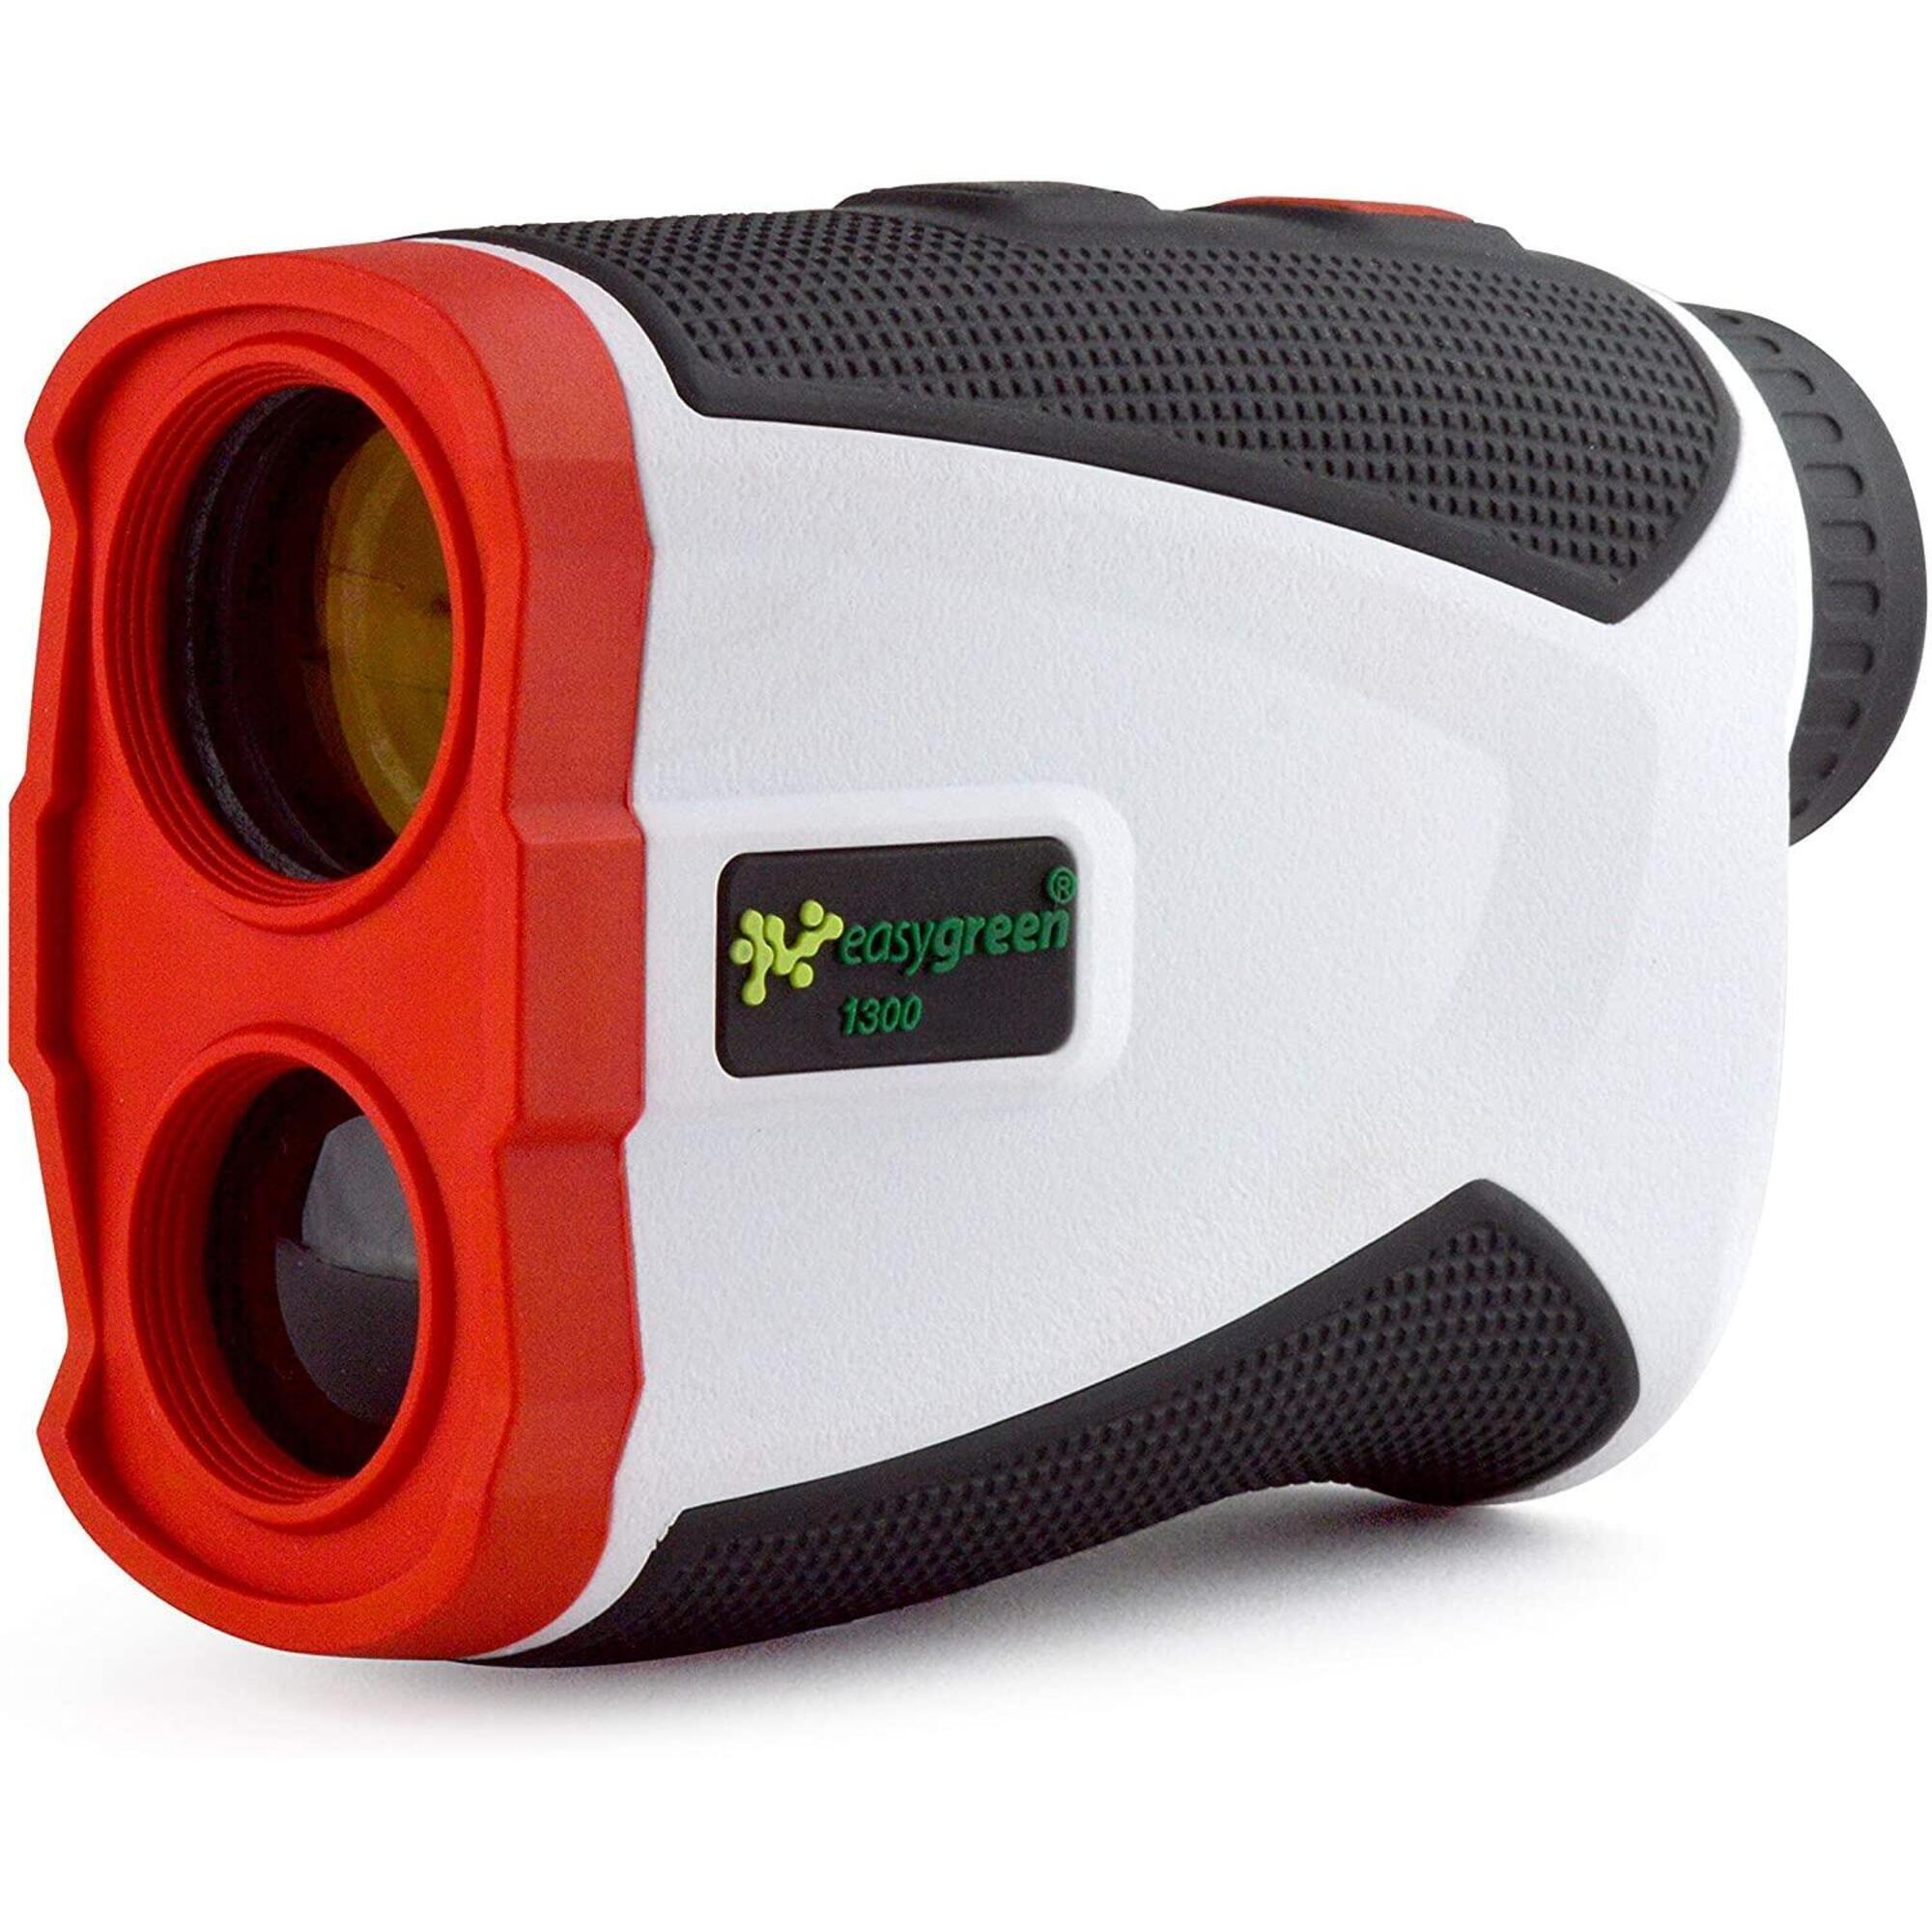 PGA TOUR EasyGreen 1300 Golf Rangefinder with Slope-Switch Technology